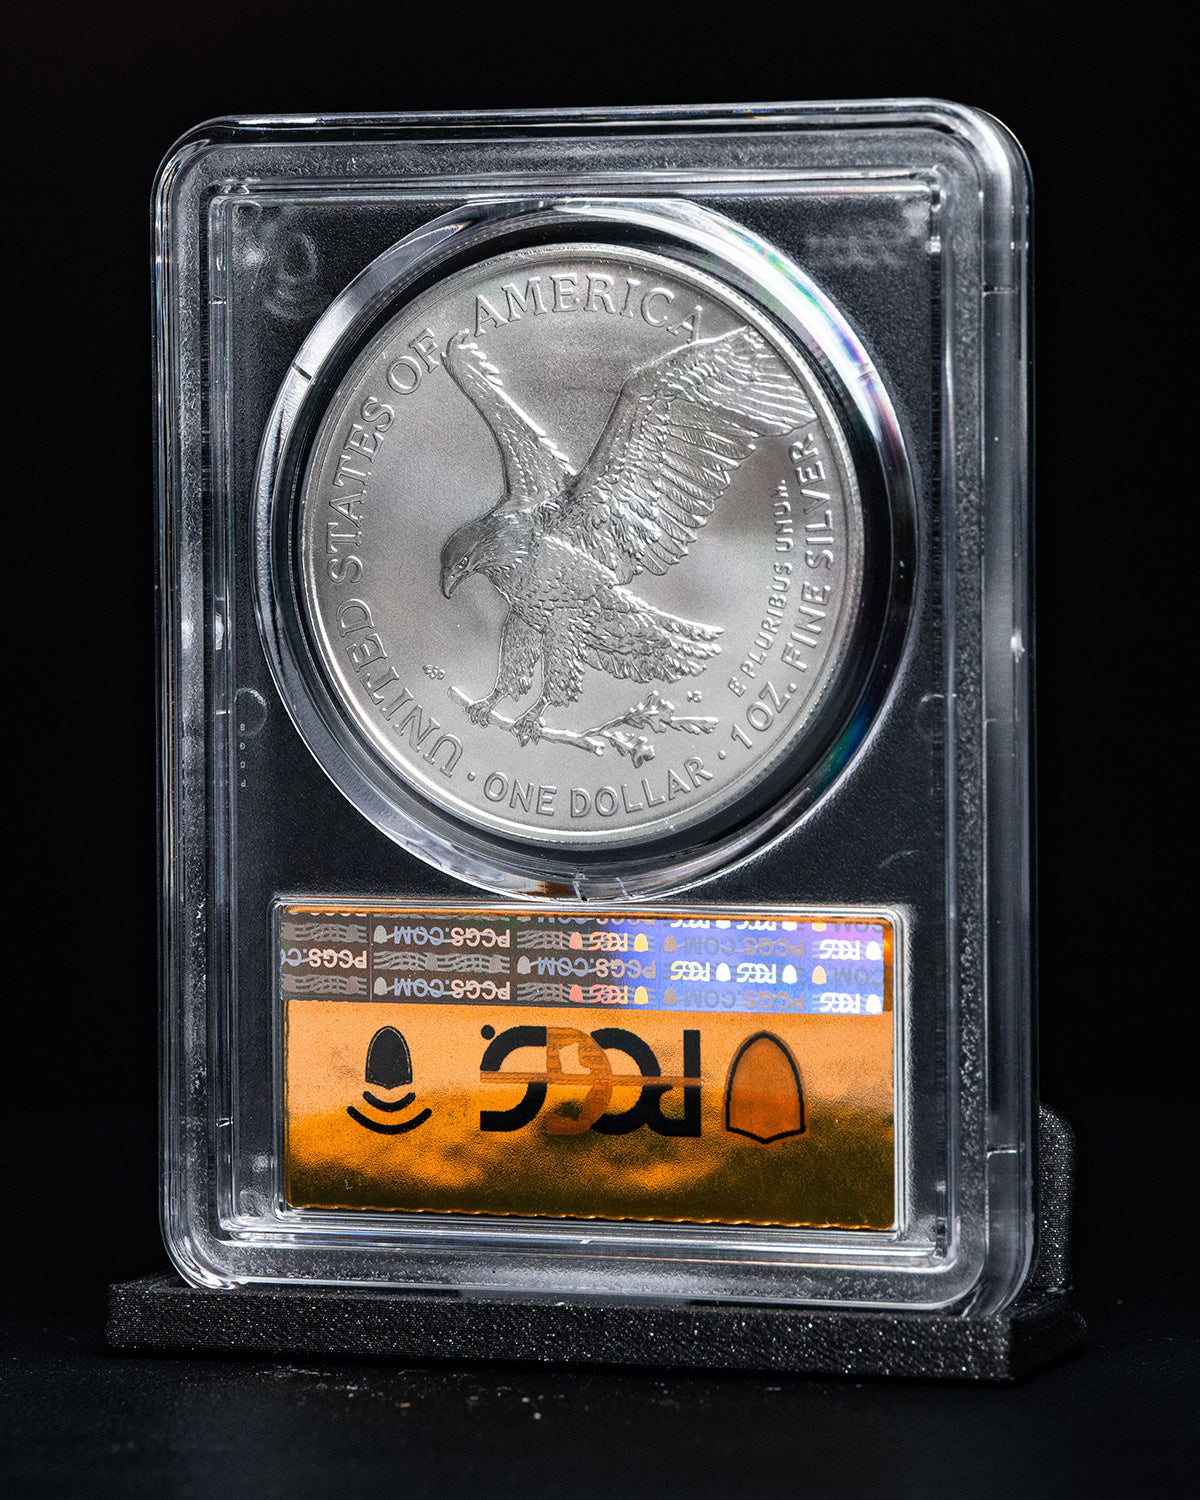 2024 $1 Gold Label Silver Eagle | First Day of Issue PCGS MS70